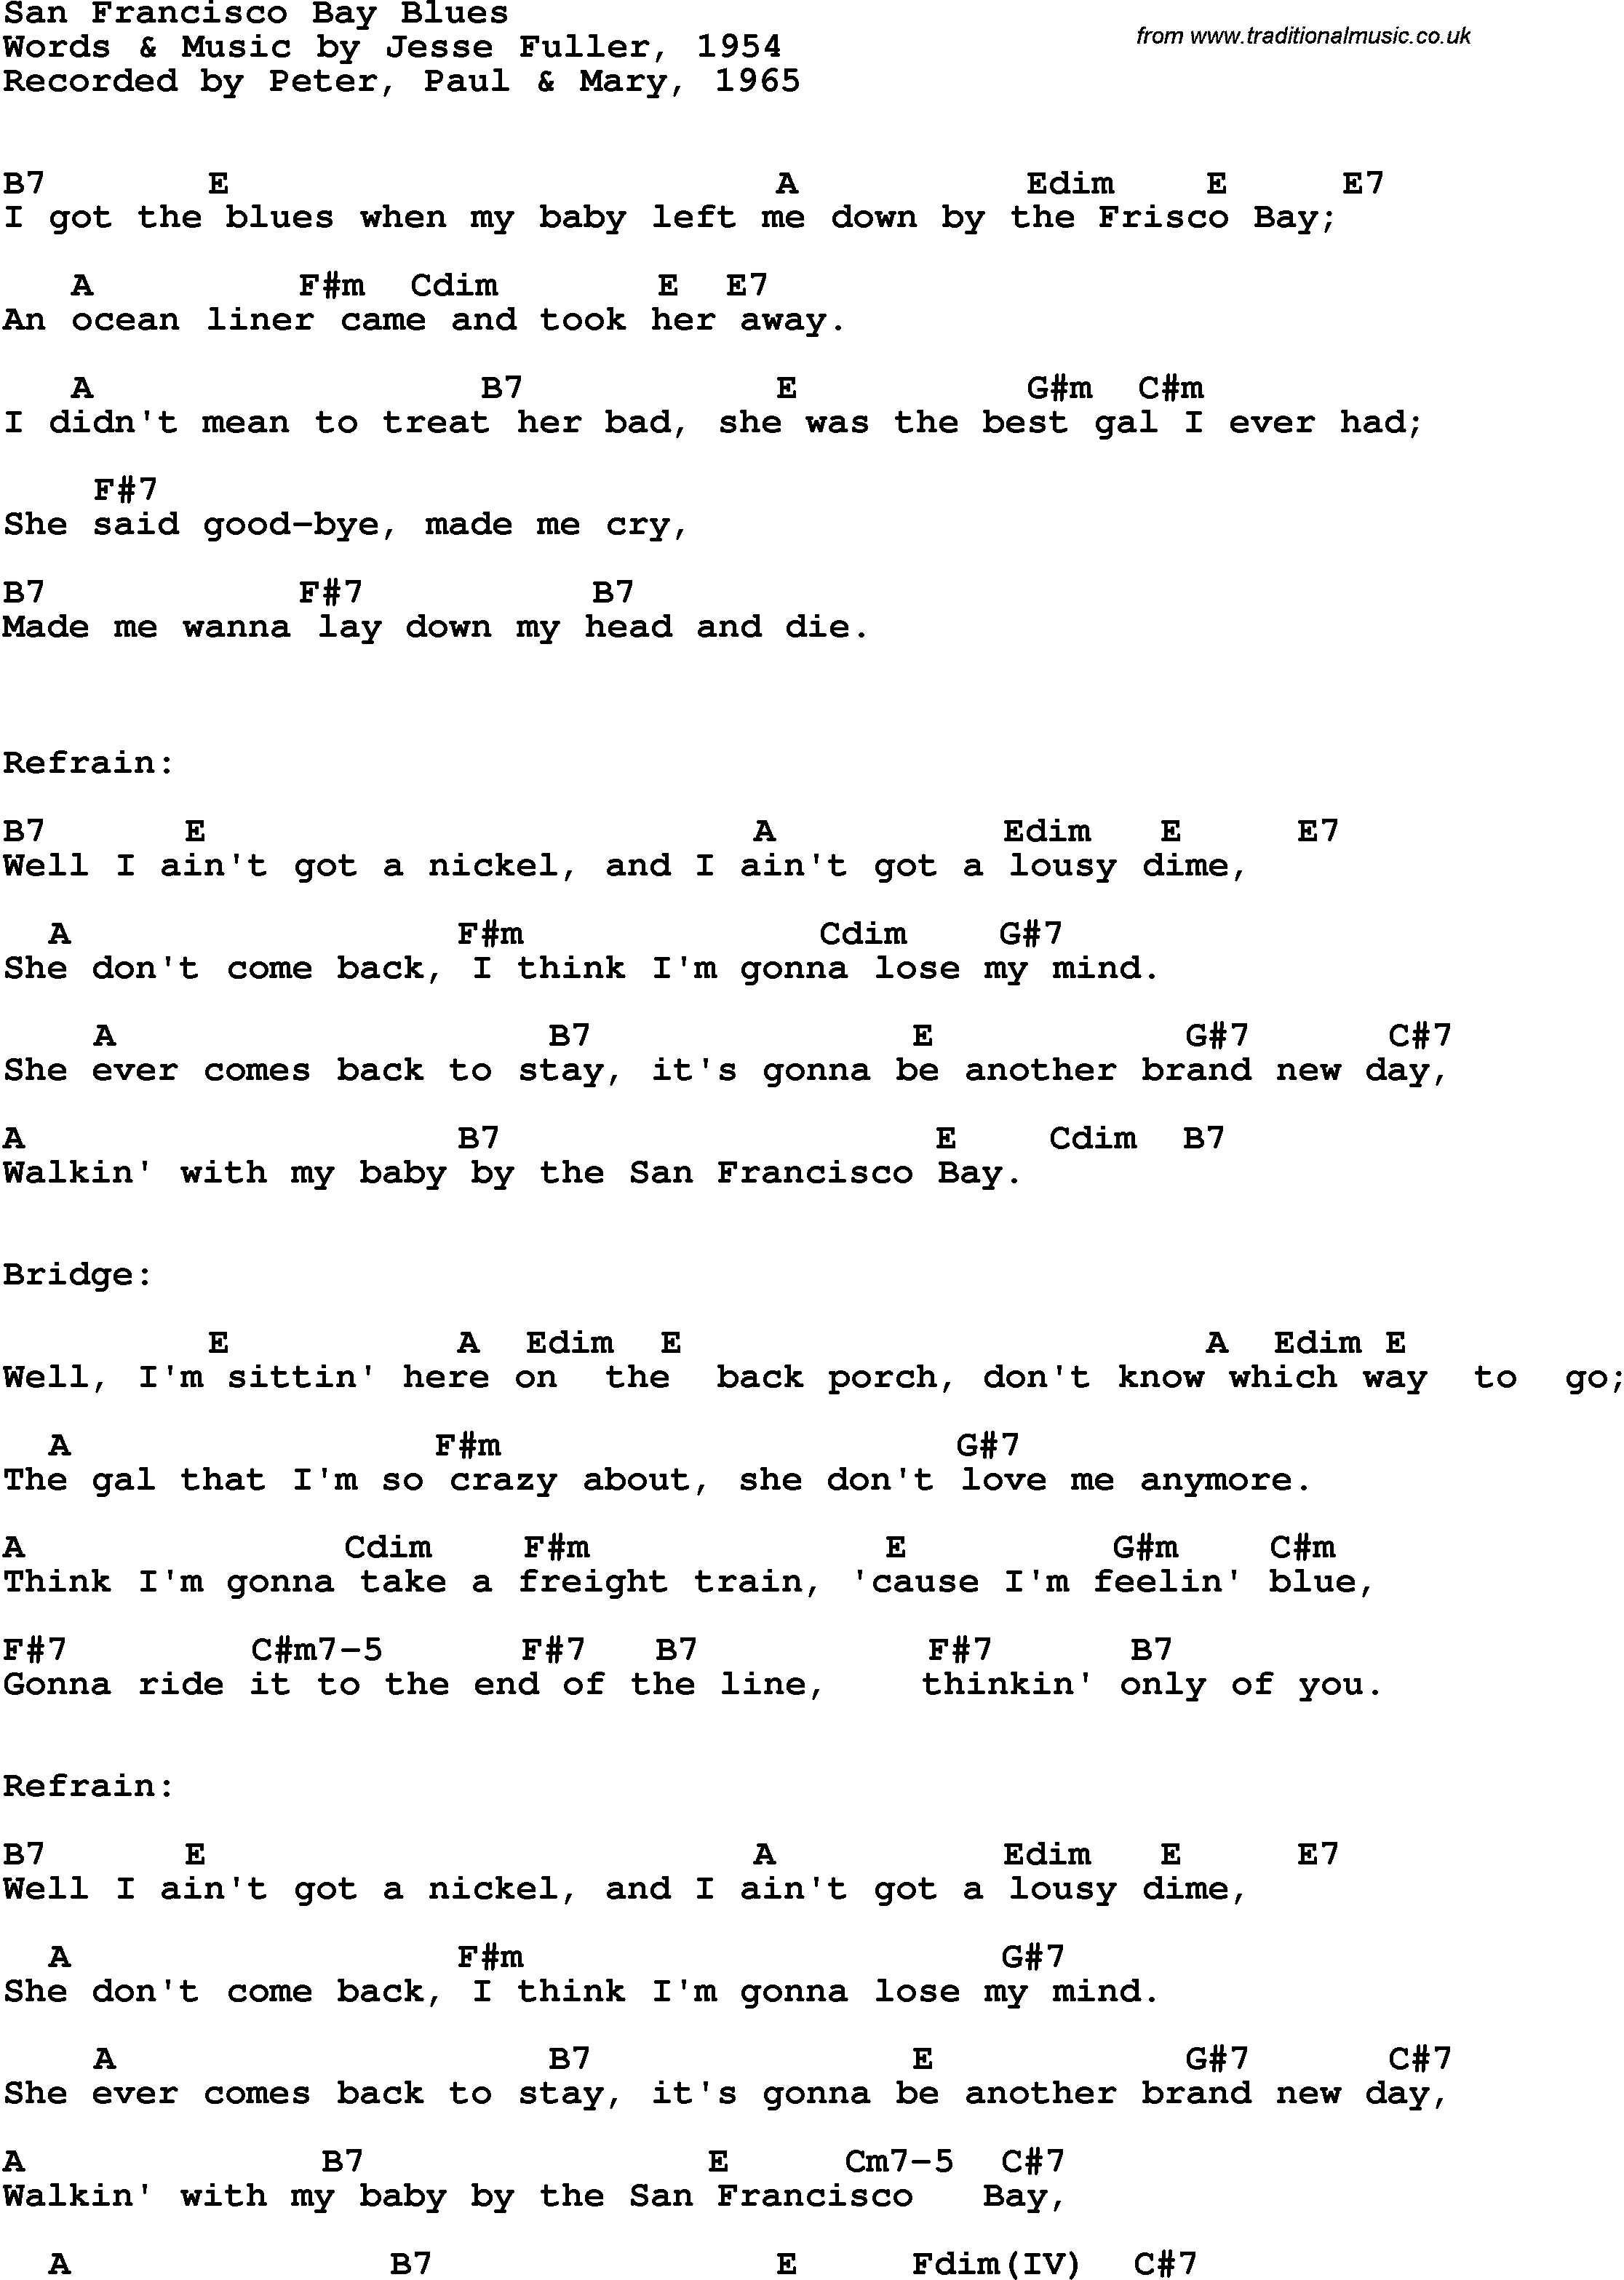 Song Lyrics with guitar chords for San Francisco Bay Blues - Peter, Paul & Mary, 1965